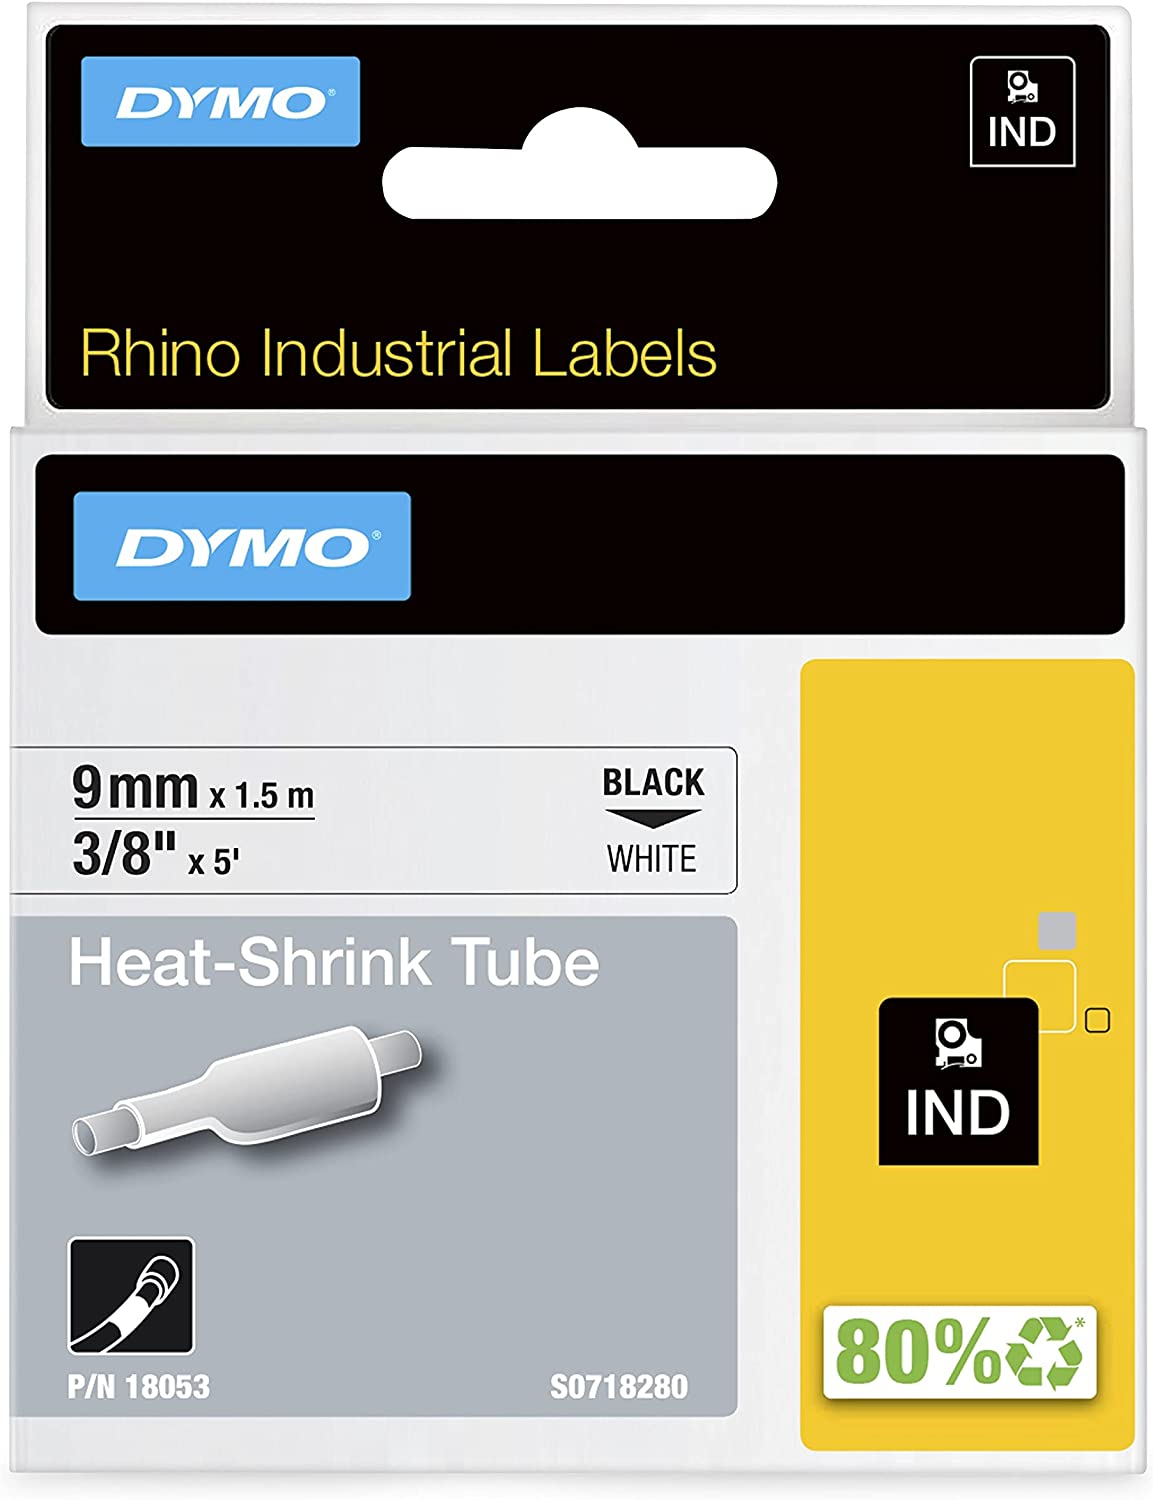 DYMO Industrial Heat Shrink Tubes for DYMO LabelWriter and Industrial Label Makers, Black on White, 3/8", (18053) 3/8" (9MM) Black on White